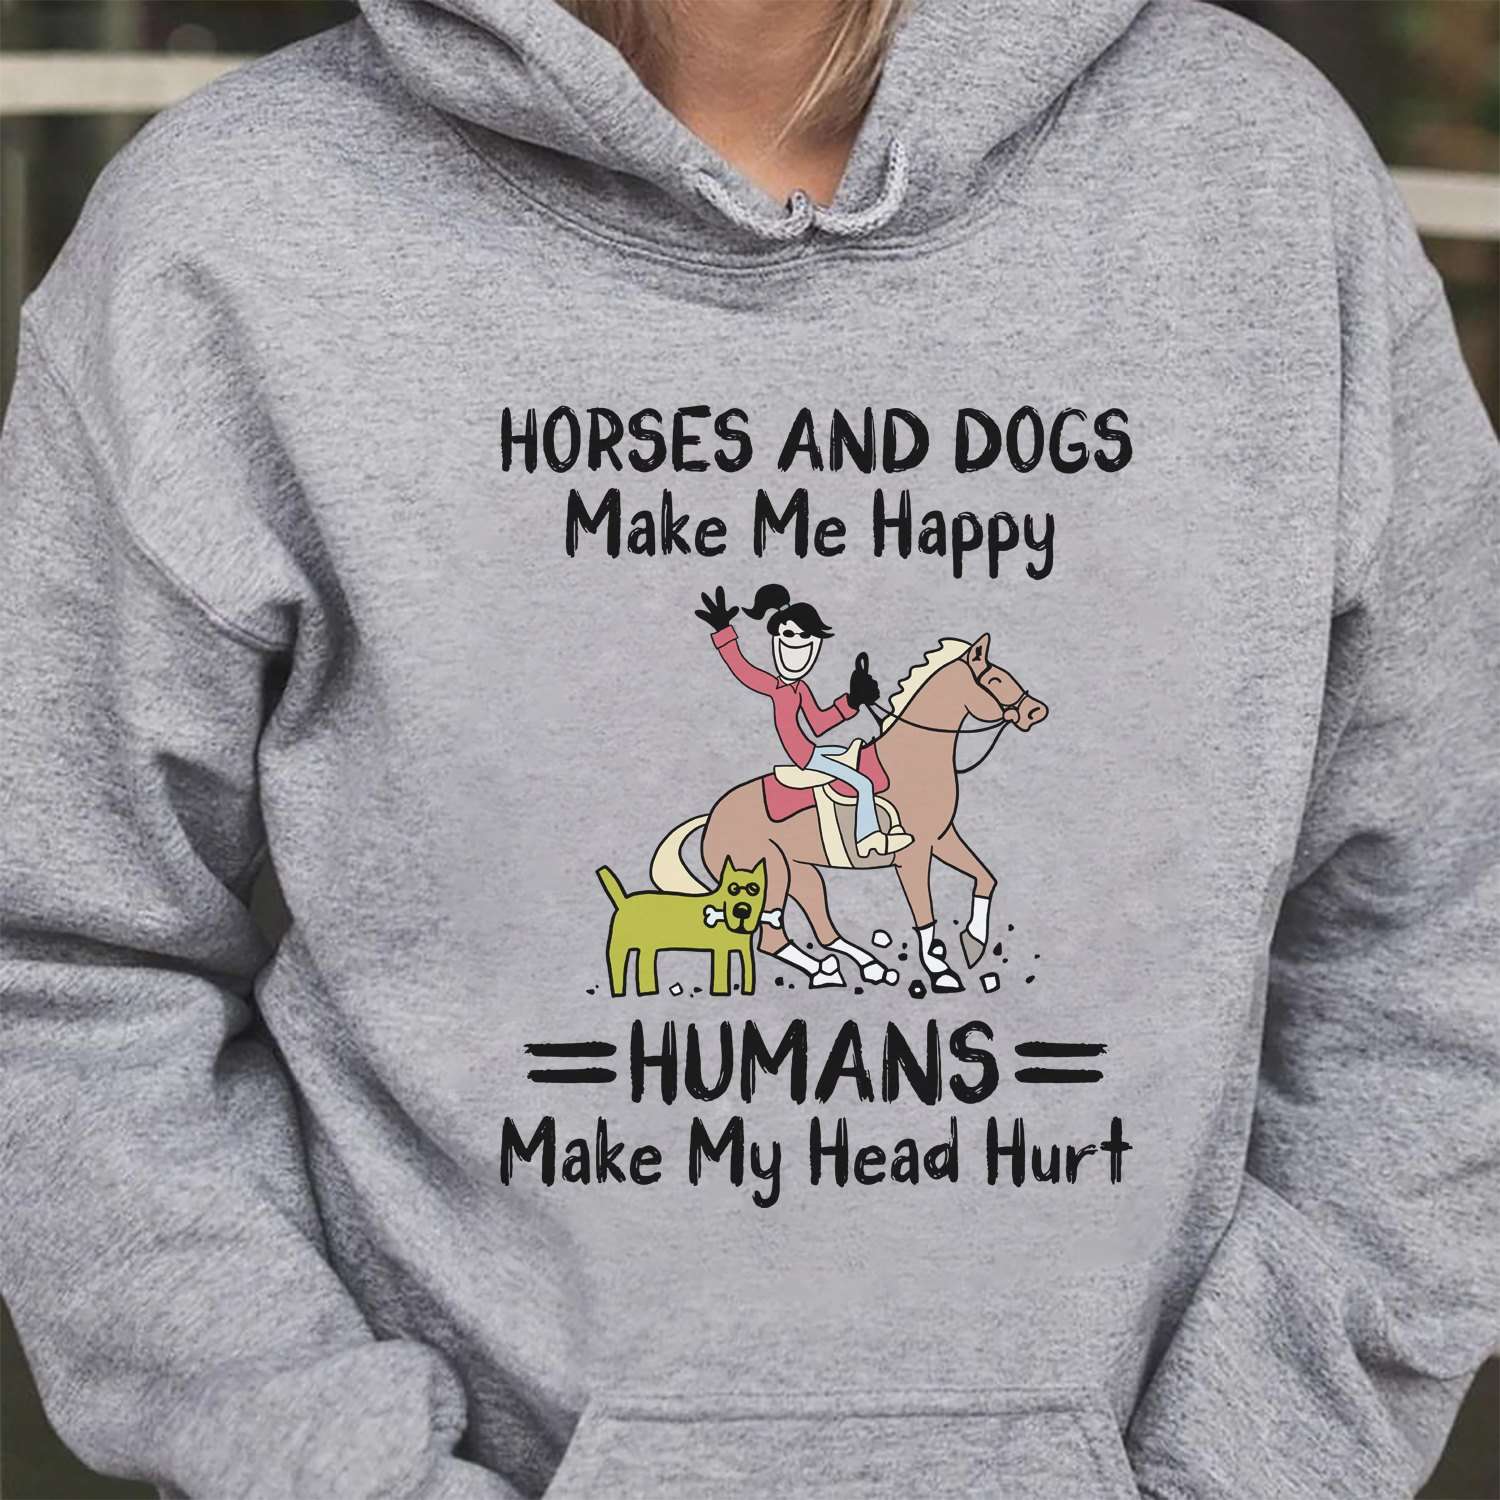 Horses and dogs make me happy, humans make my head hurt - Girl riding horse, gift for dog lover